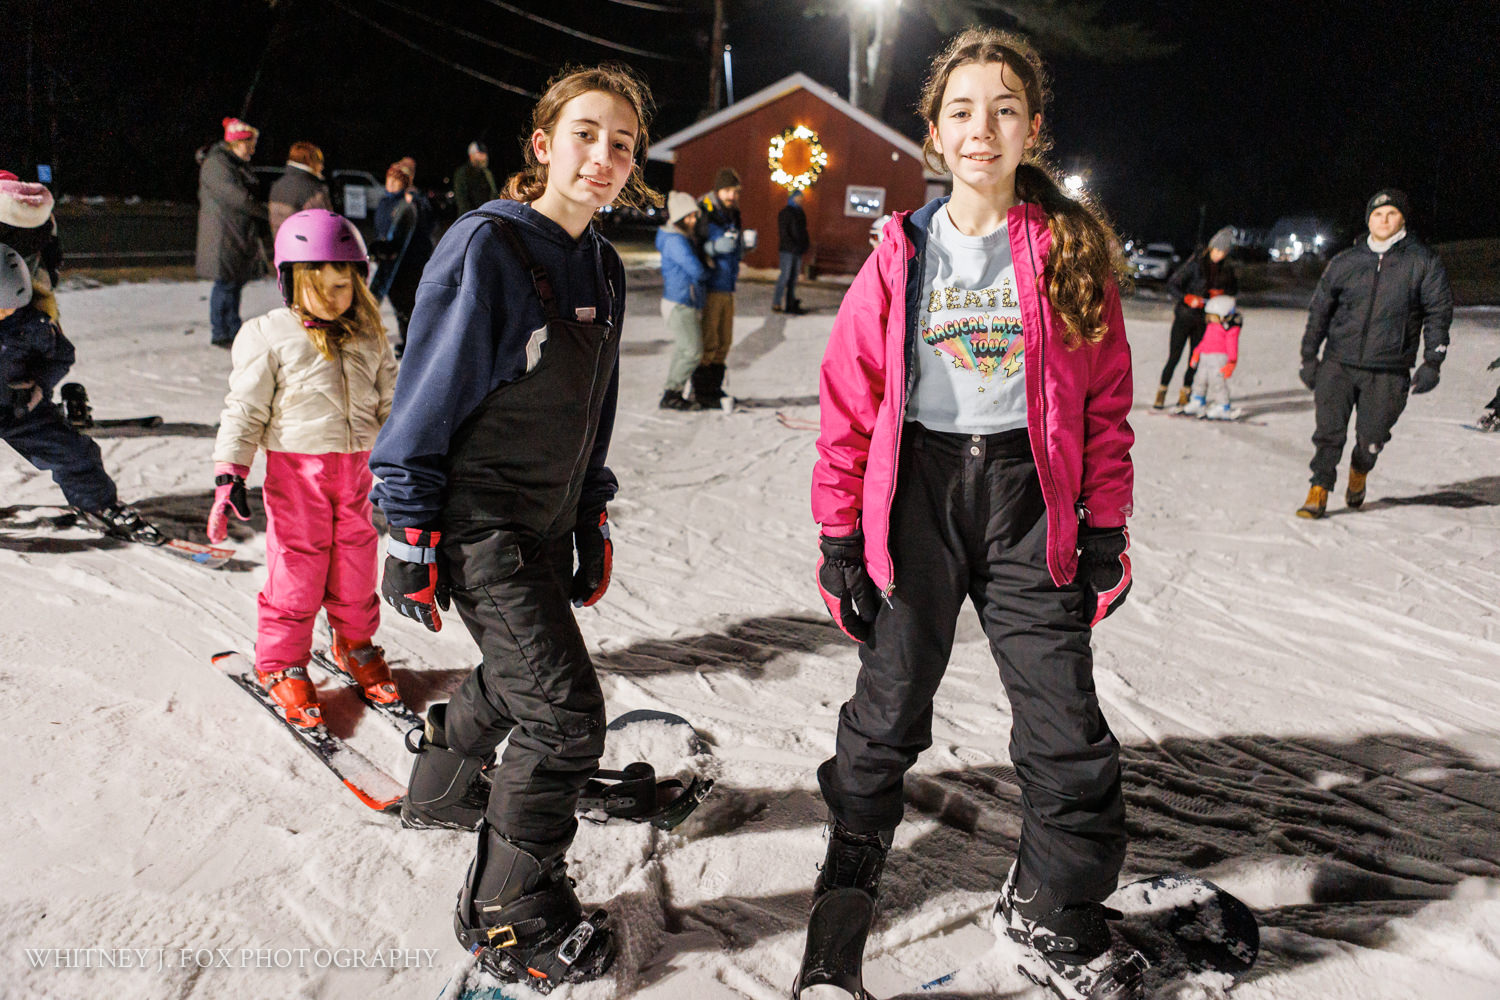 647 winter kids welcome to winter 2022 lost valley auburn maine documentary event photographer whitney j fox 3970 w